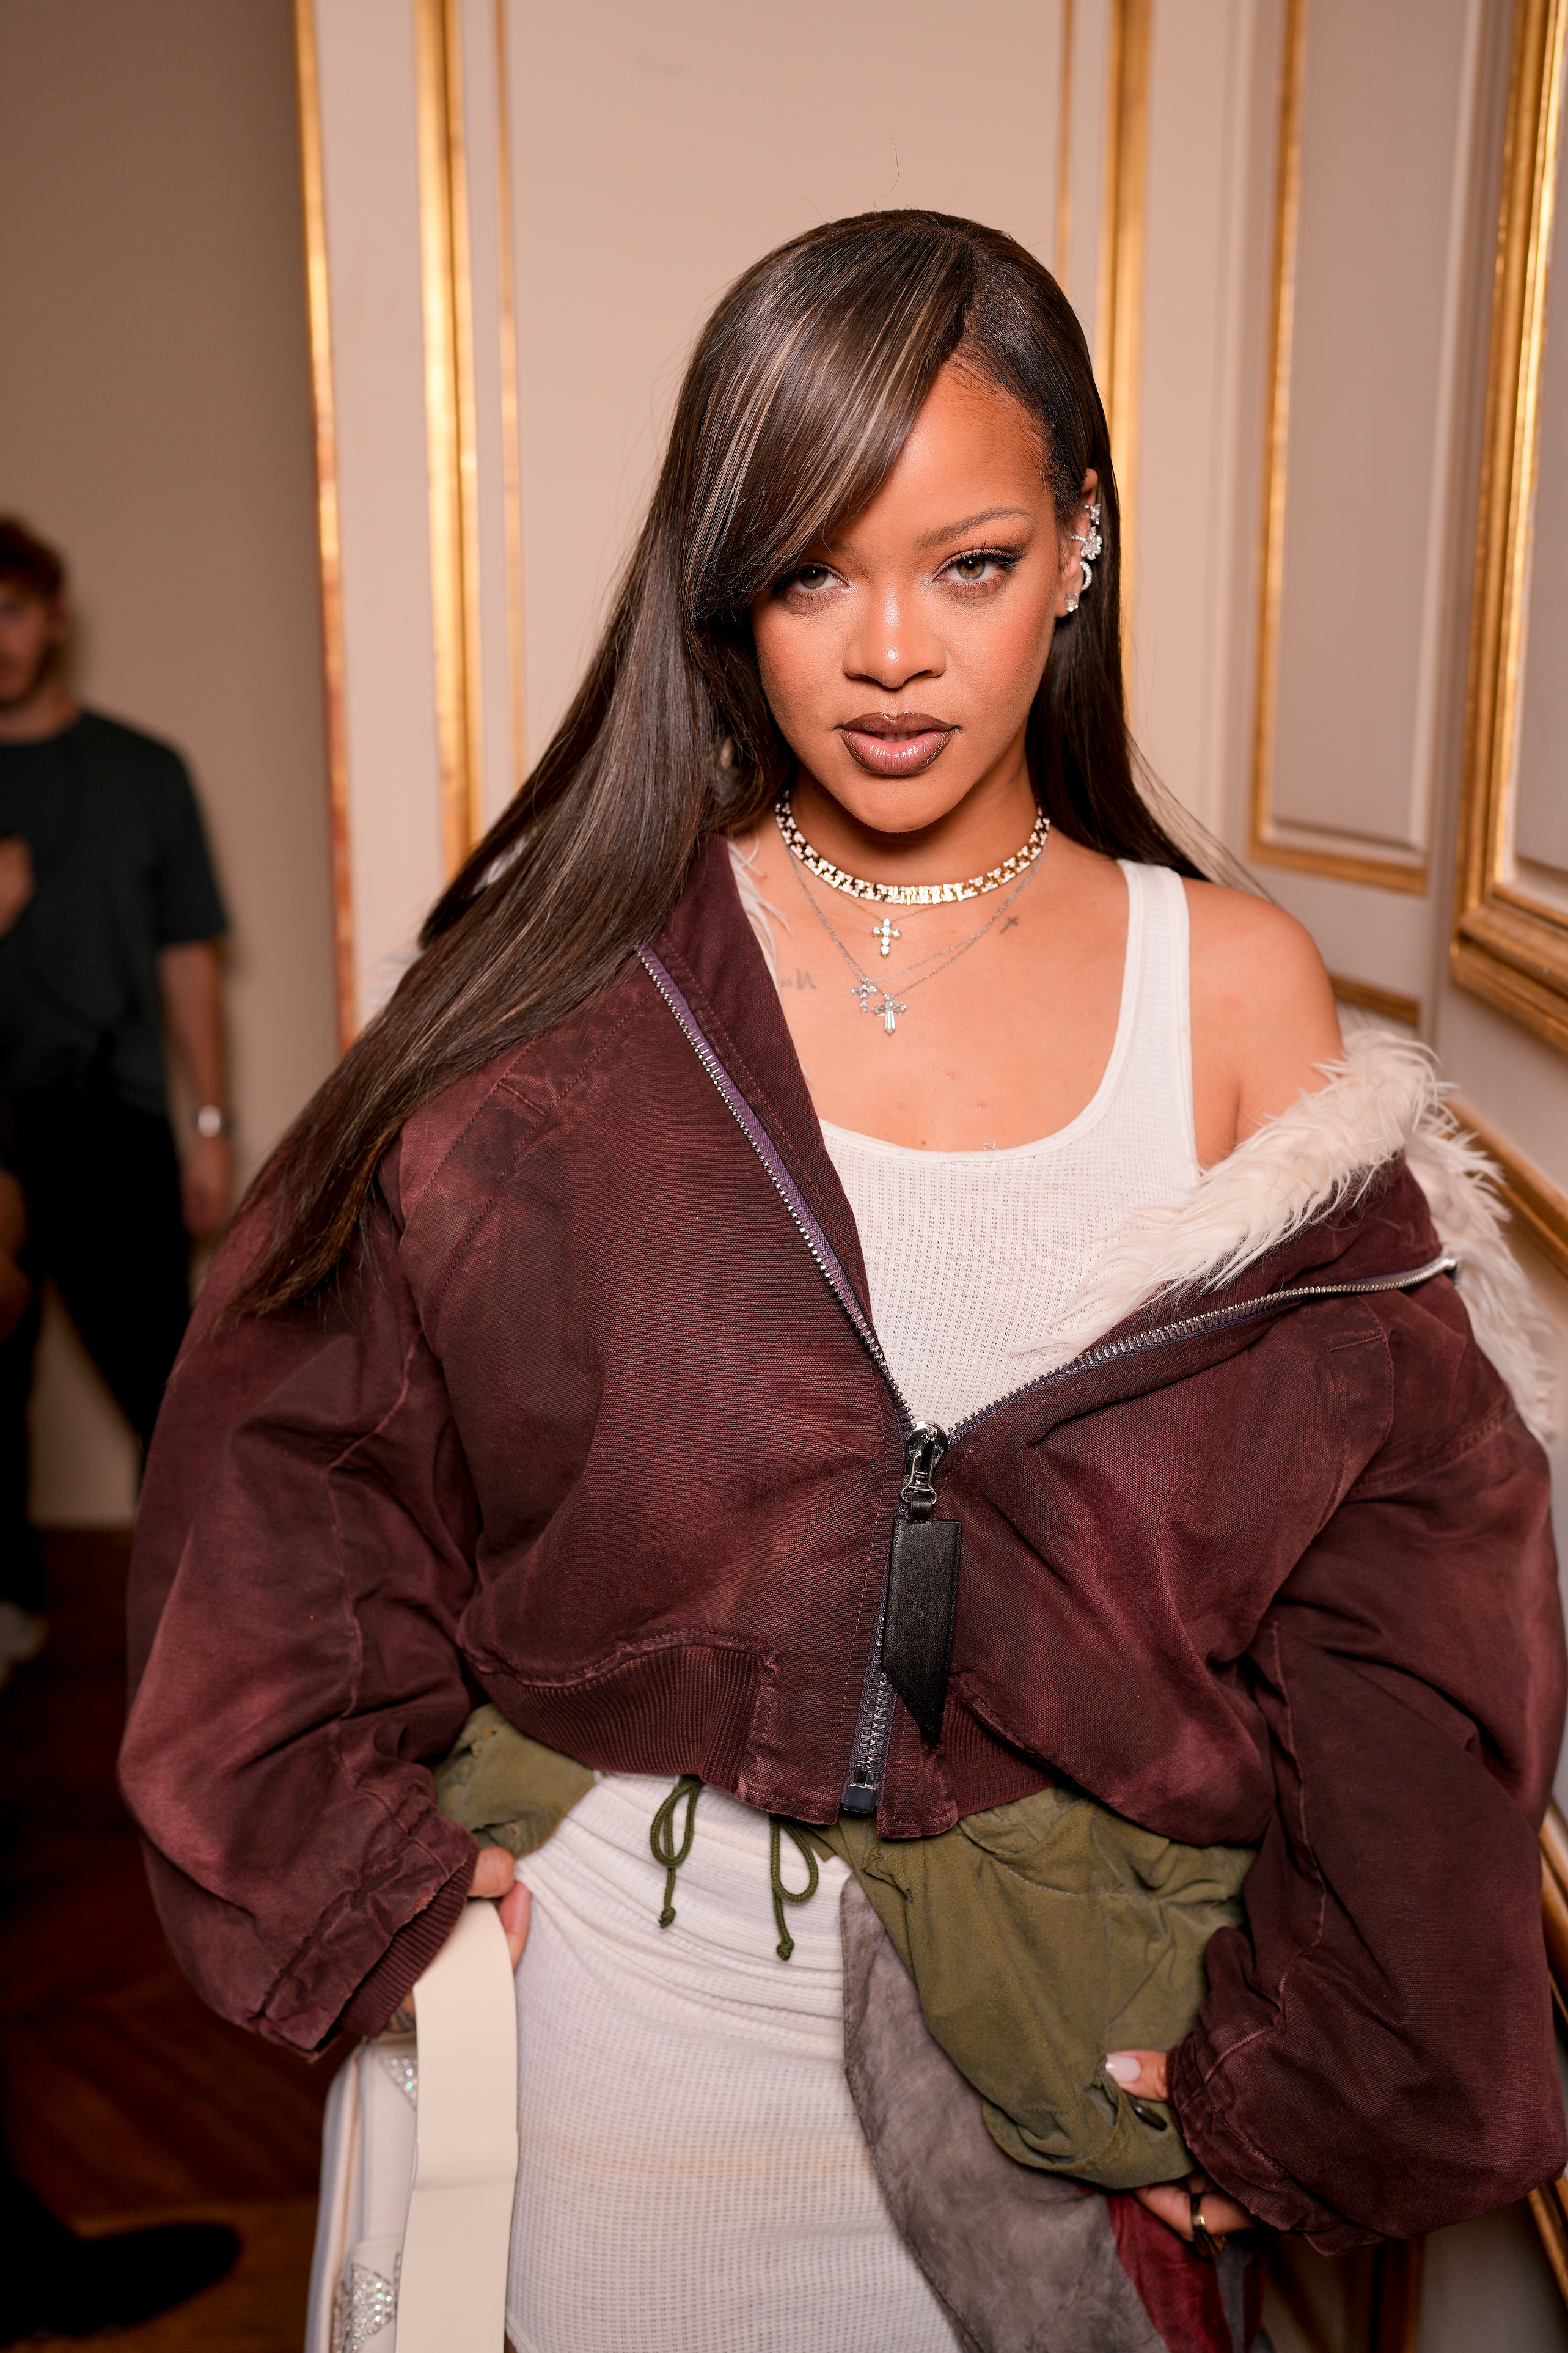 Rihanna at an event, wearing a stylish white dress paired with a burgundy jacket and multiple necklaces